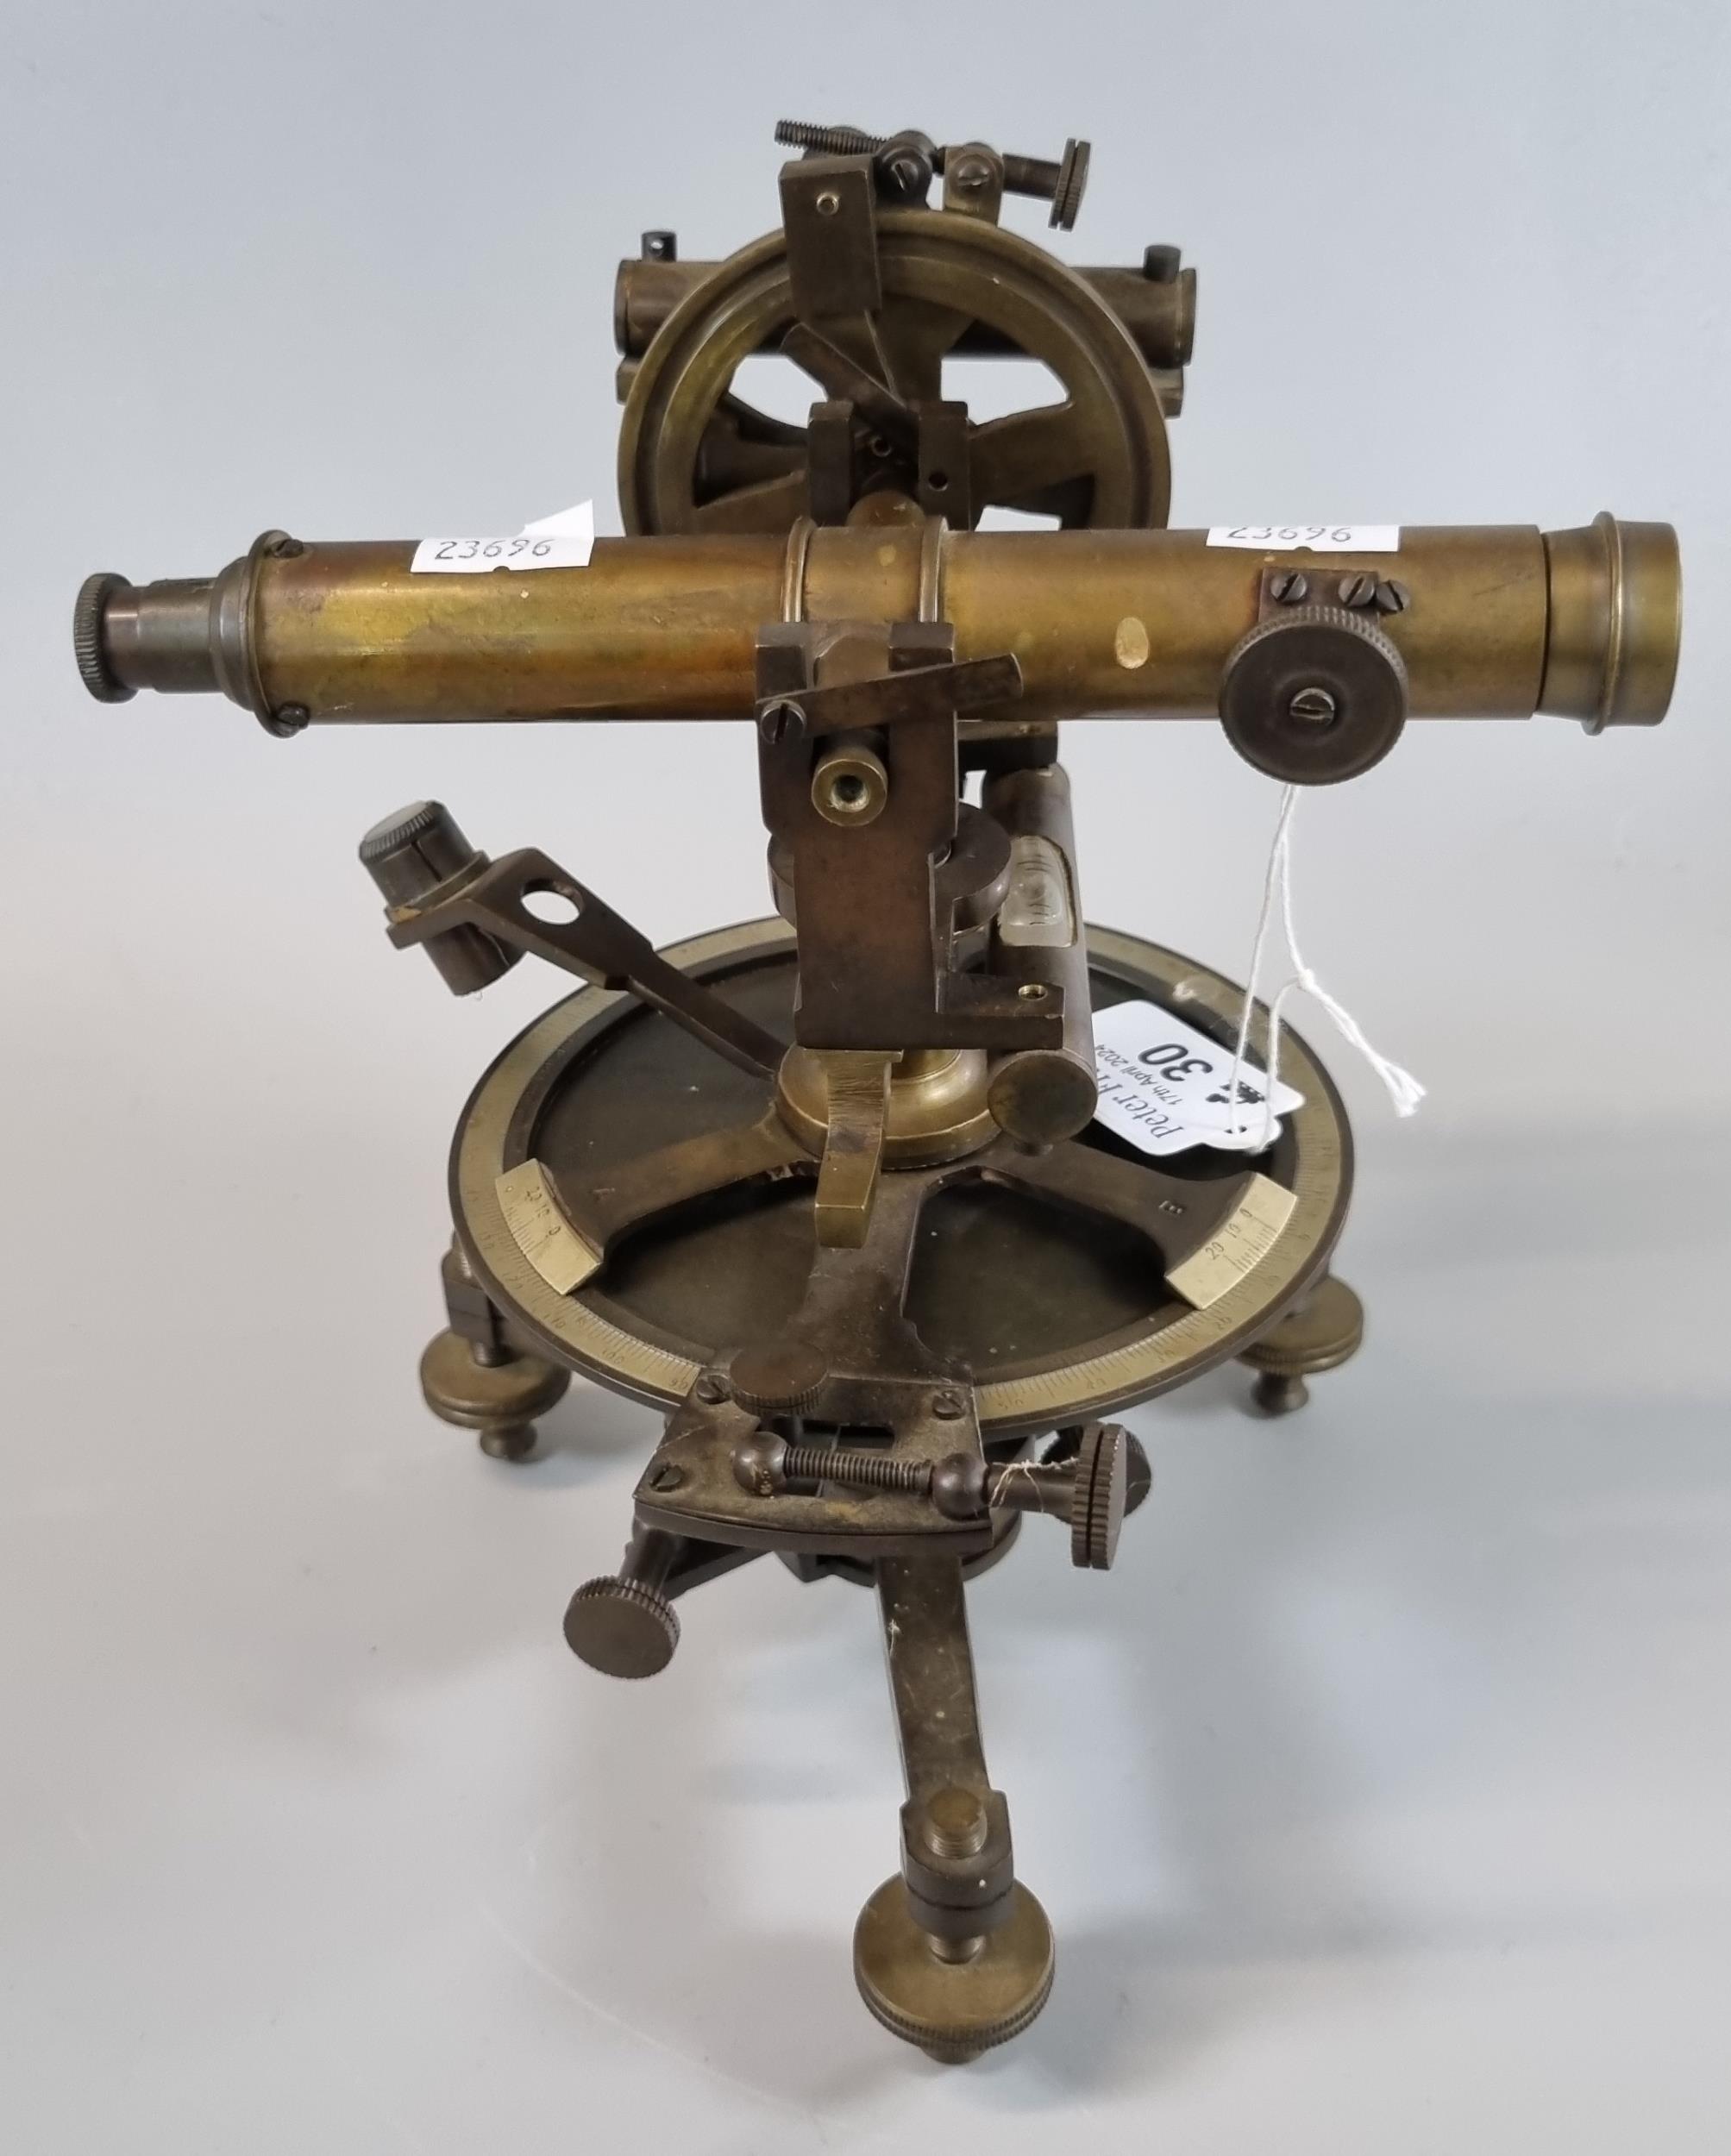 Late 19th/early 20th century brass and bronze theodolite. Unmarked. (B.P. 21% + VAT) - Image 2 of 2